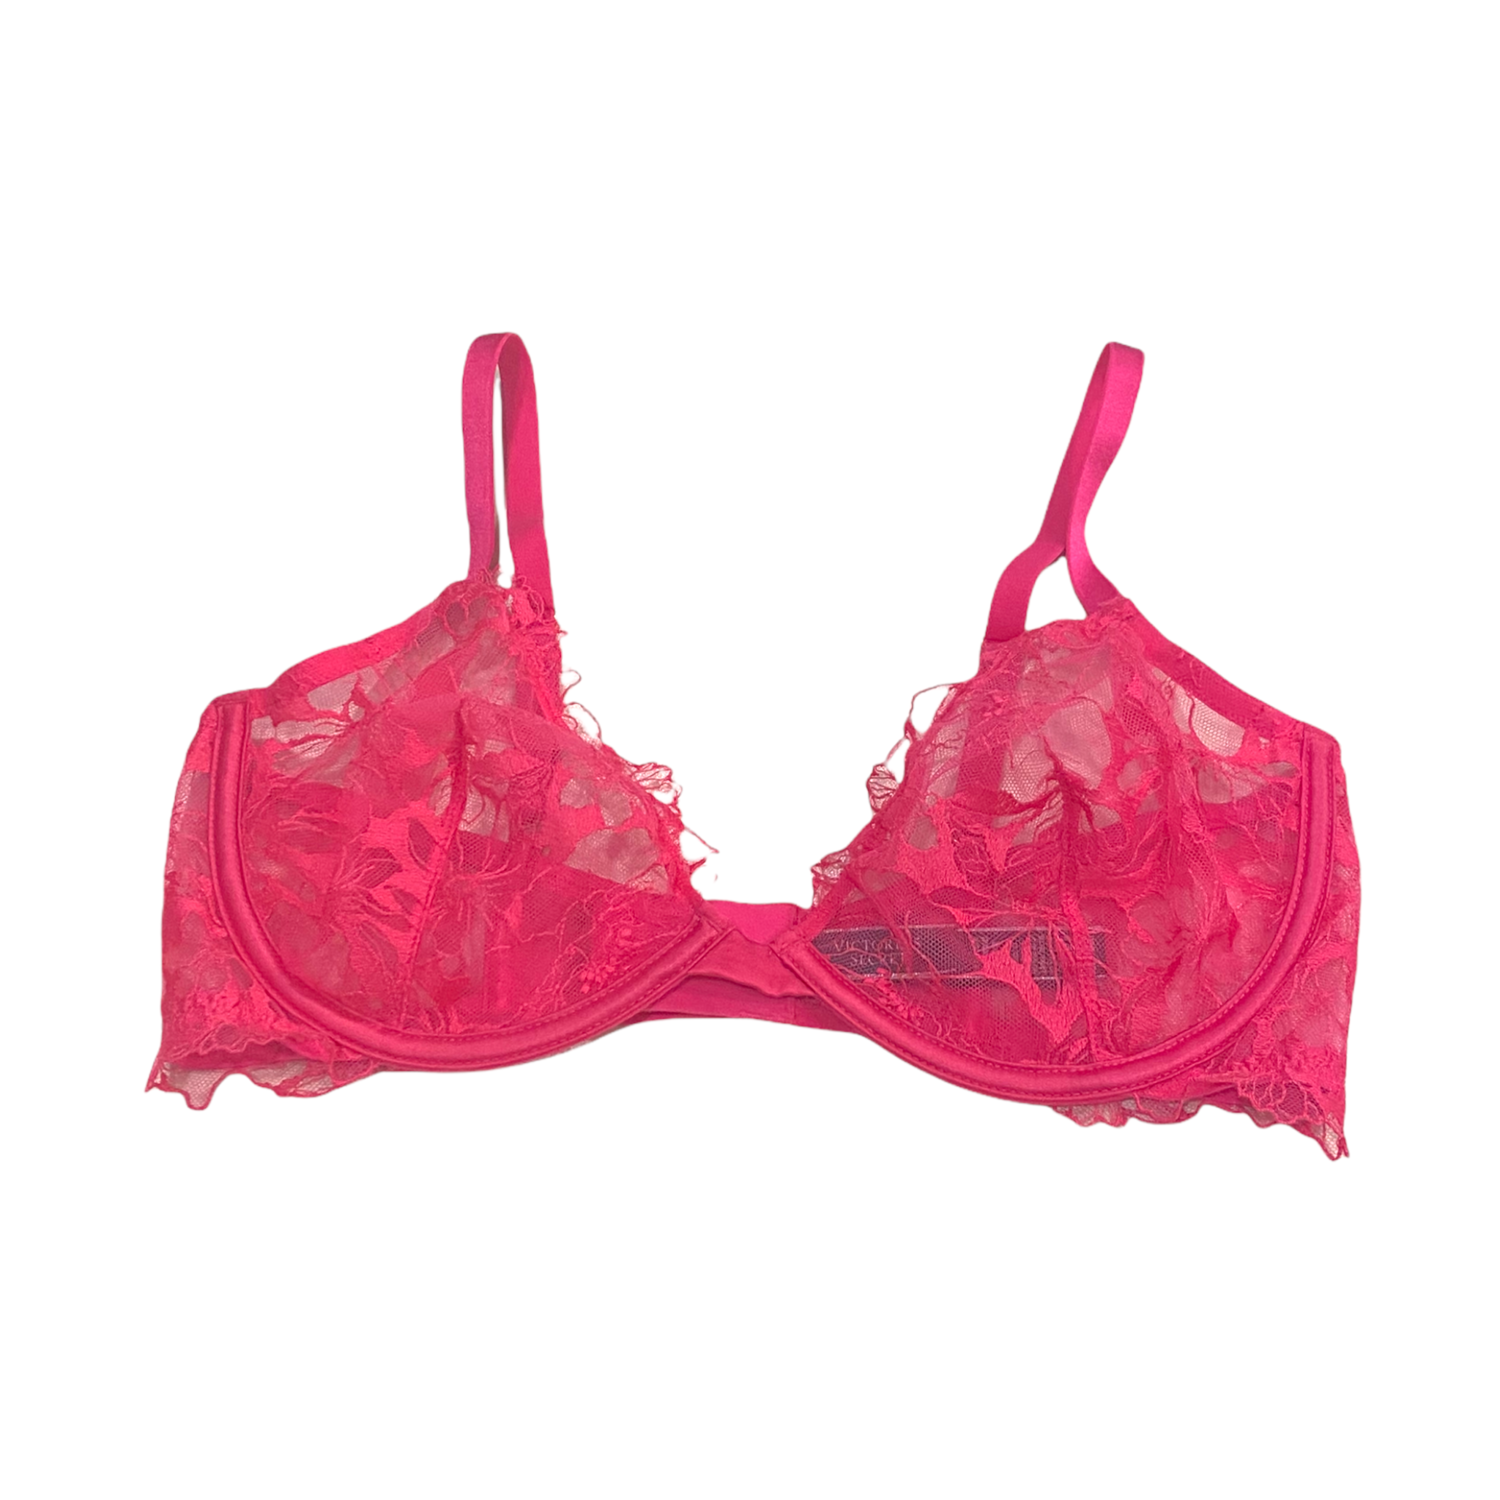 Victoria's Secret Very Sexy Unlined Low-Cut Demi Floral Lace Pink